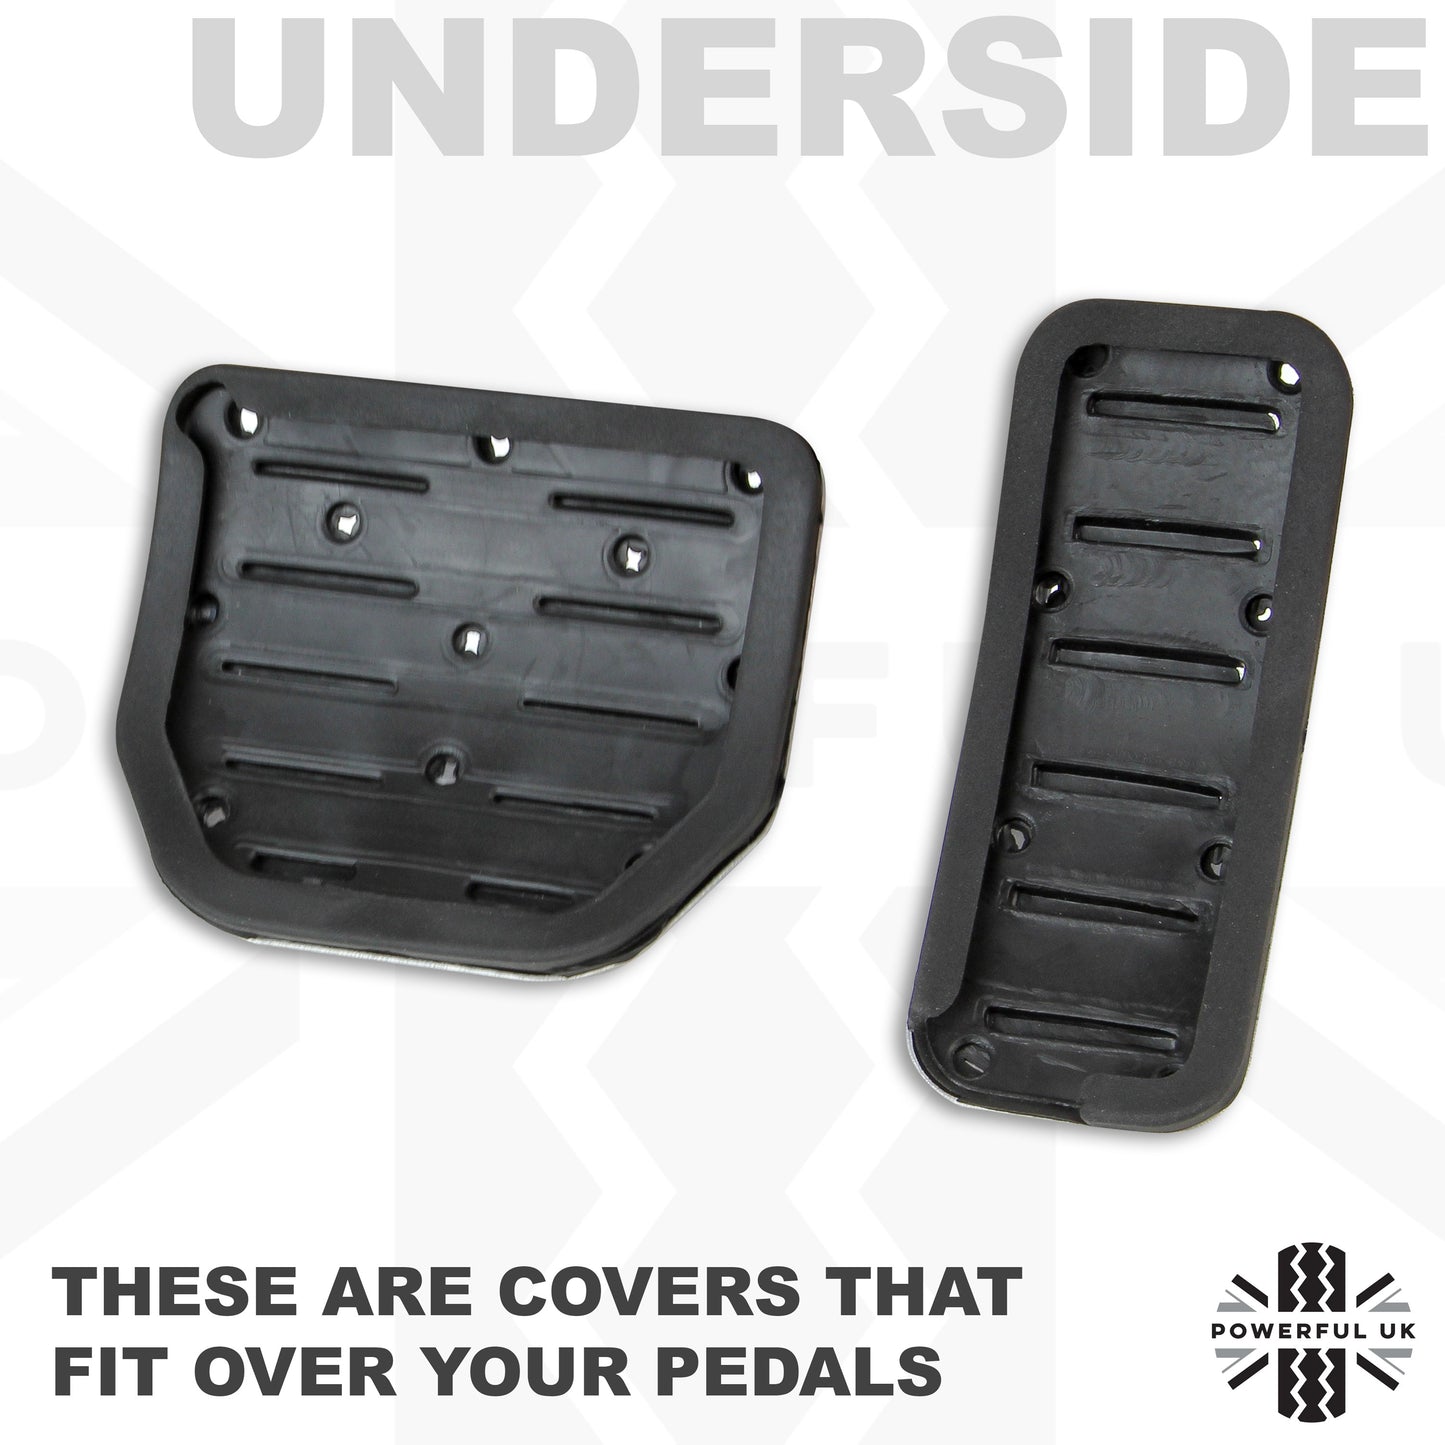 Easy Fit Pedal Cover Kit (3pc) for Land  Rover Discovery 3 & 4